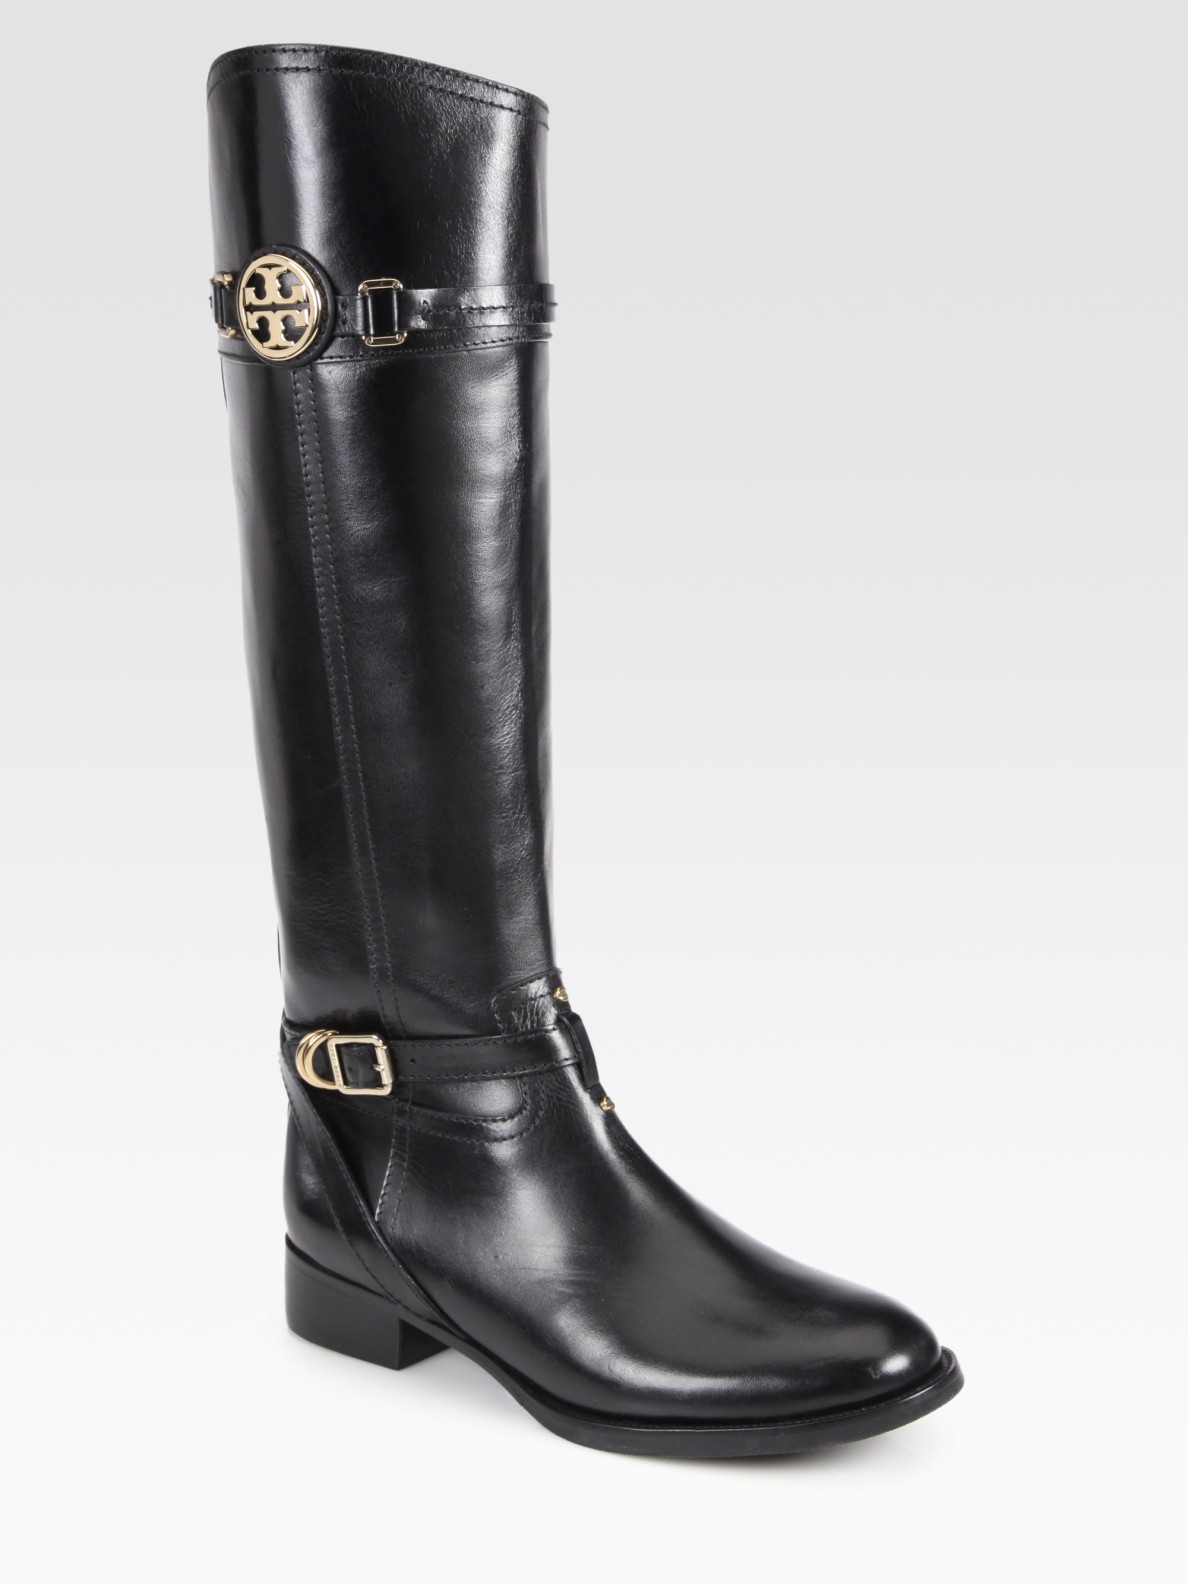 Tory Burch Calista Leather Riding Boots in Black | Lyst